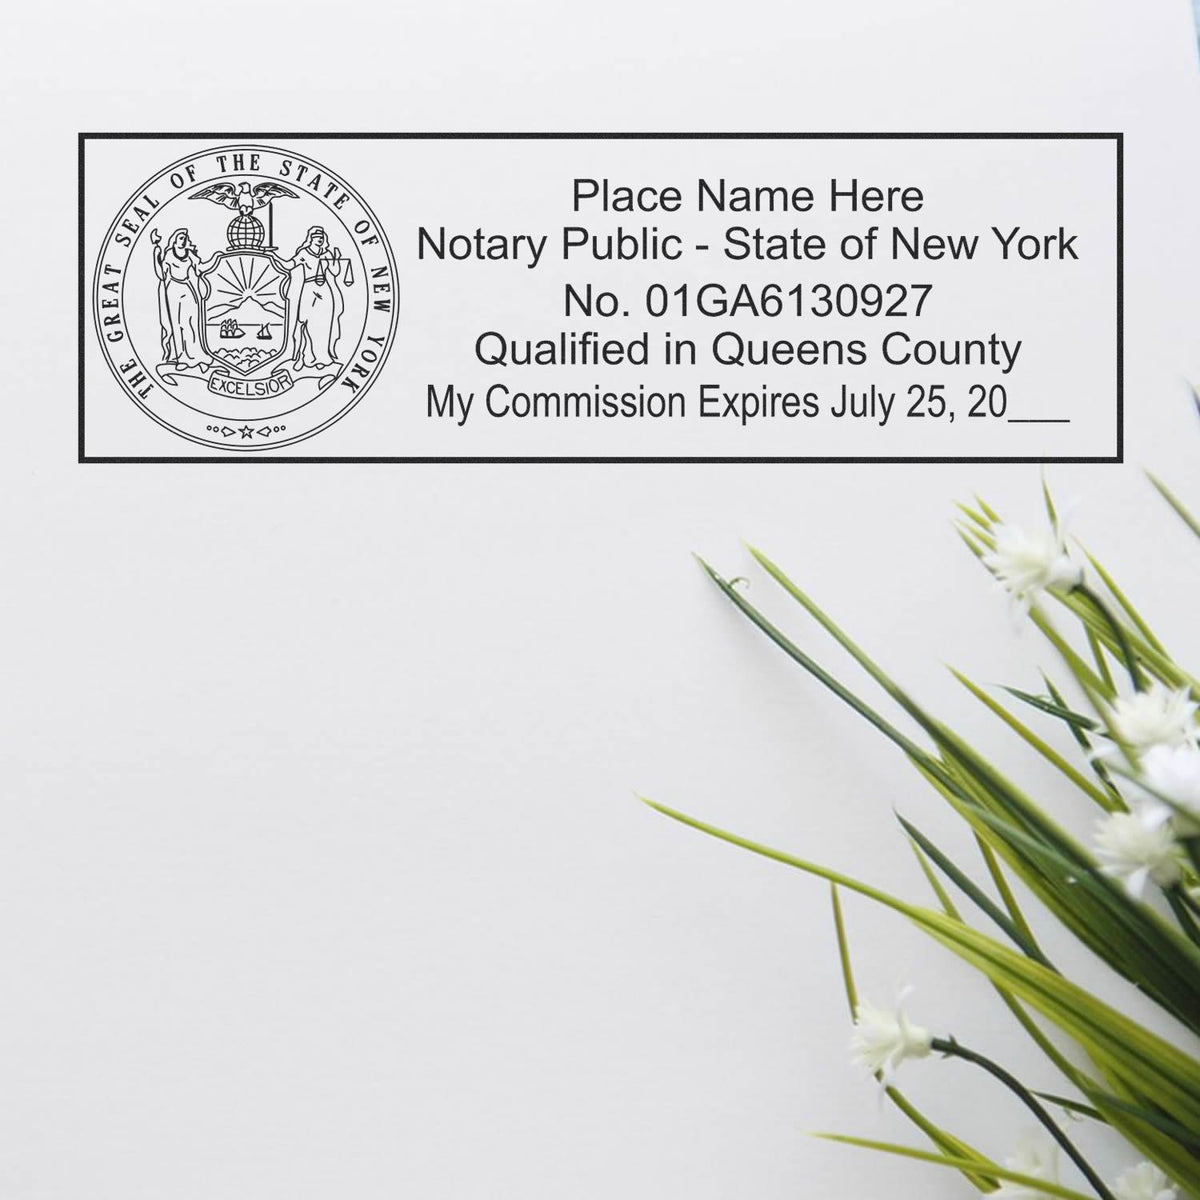 An alternative view of the PSI New York Notary Stamp stamped on a sheet of paper showing the image in use